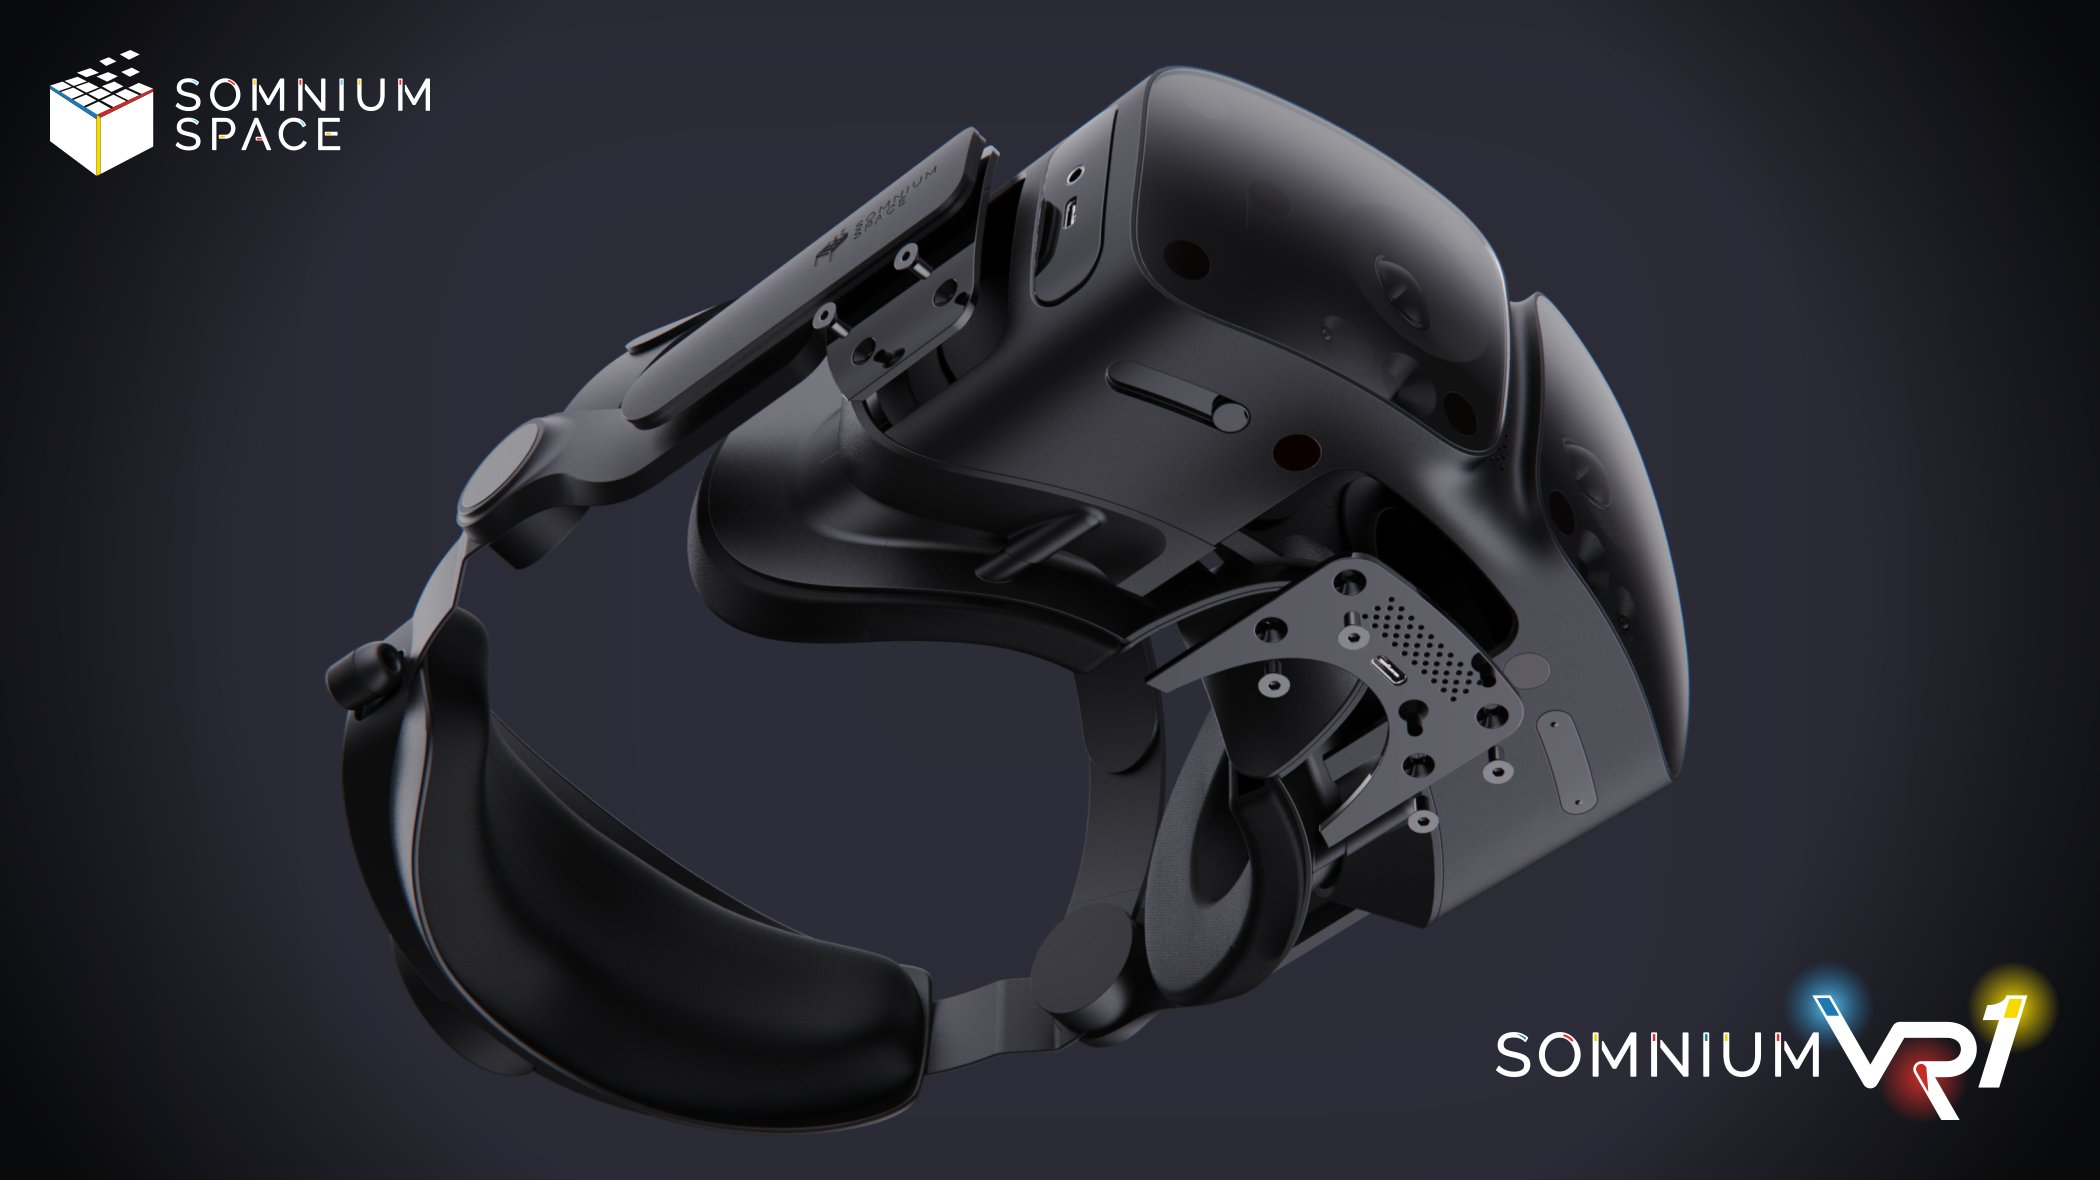 The XR Week Peek (2022.12.27): Somnium VR1 to be revealed at CES, Wireless PSVR 2 still a possibility, and more!